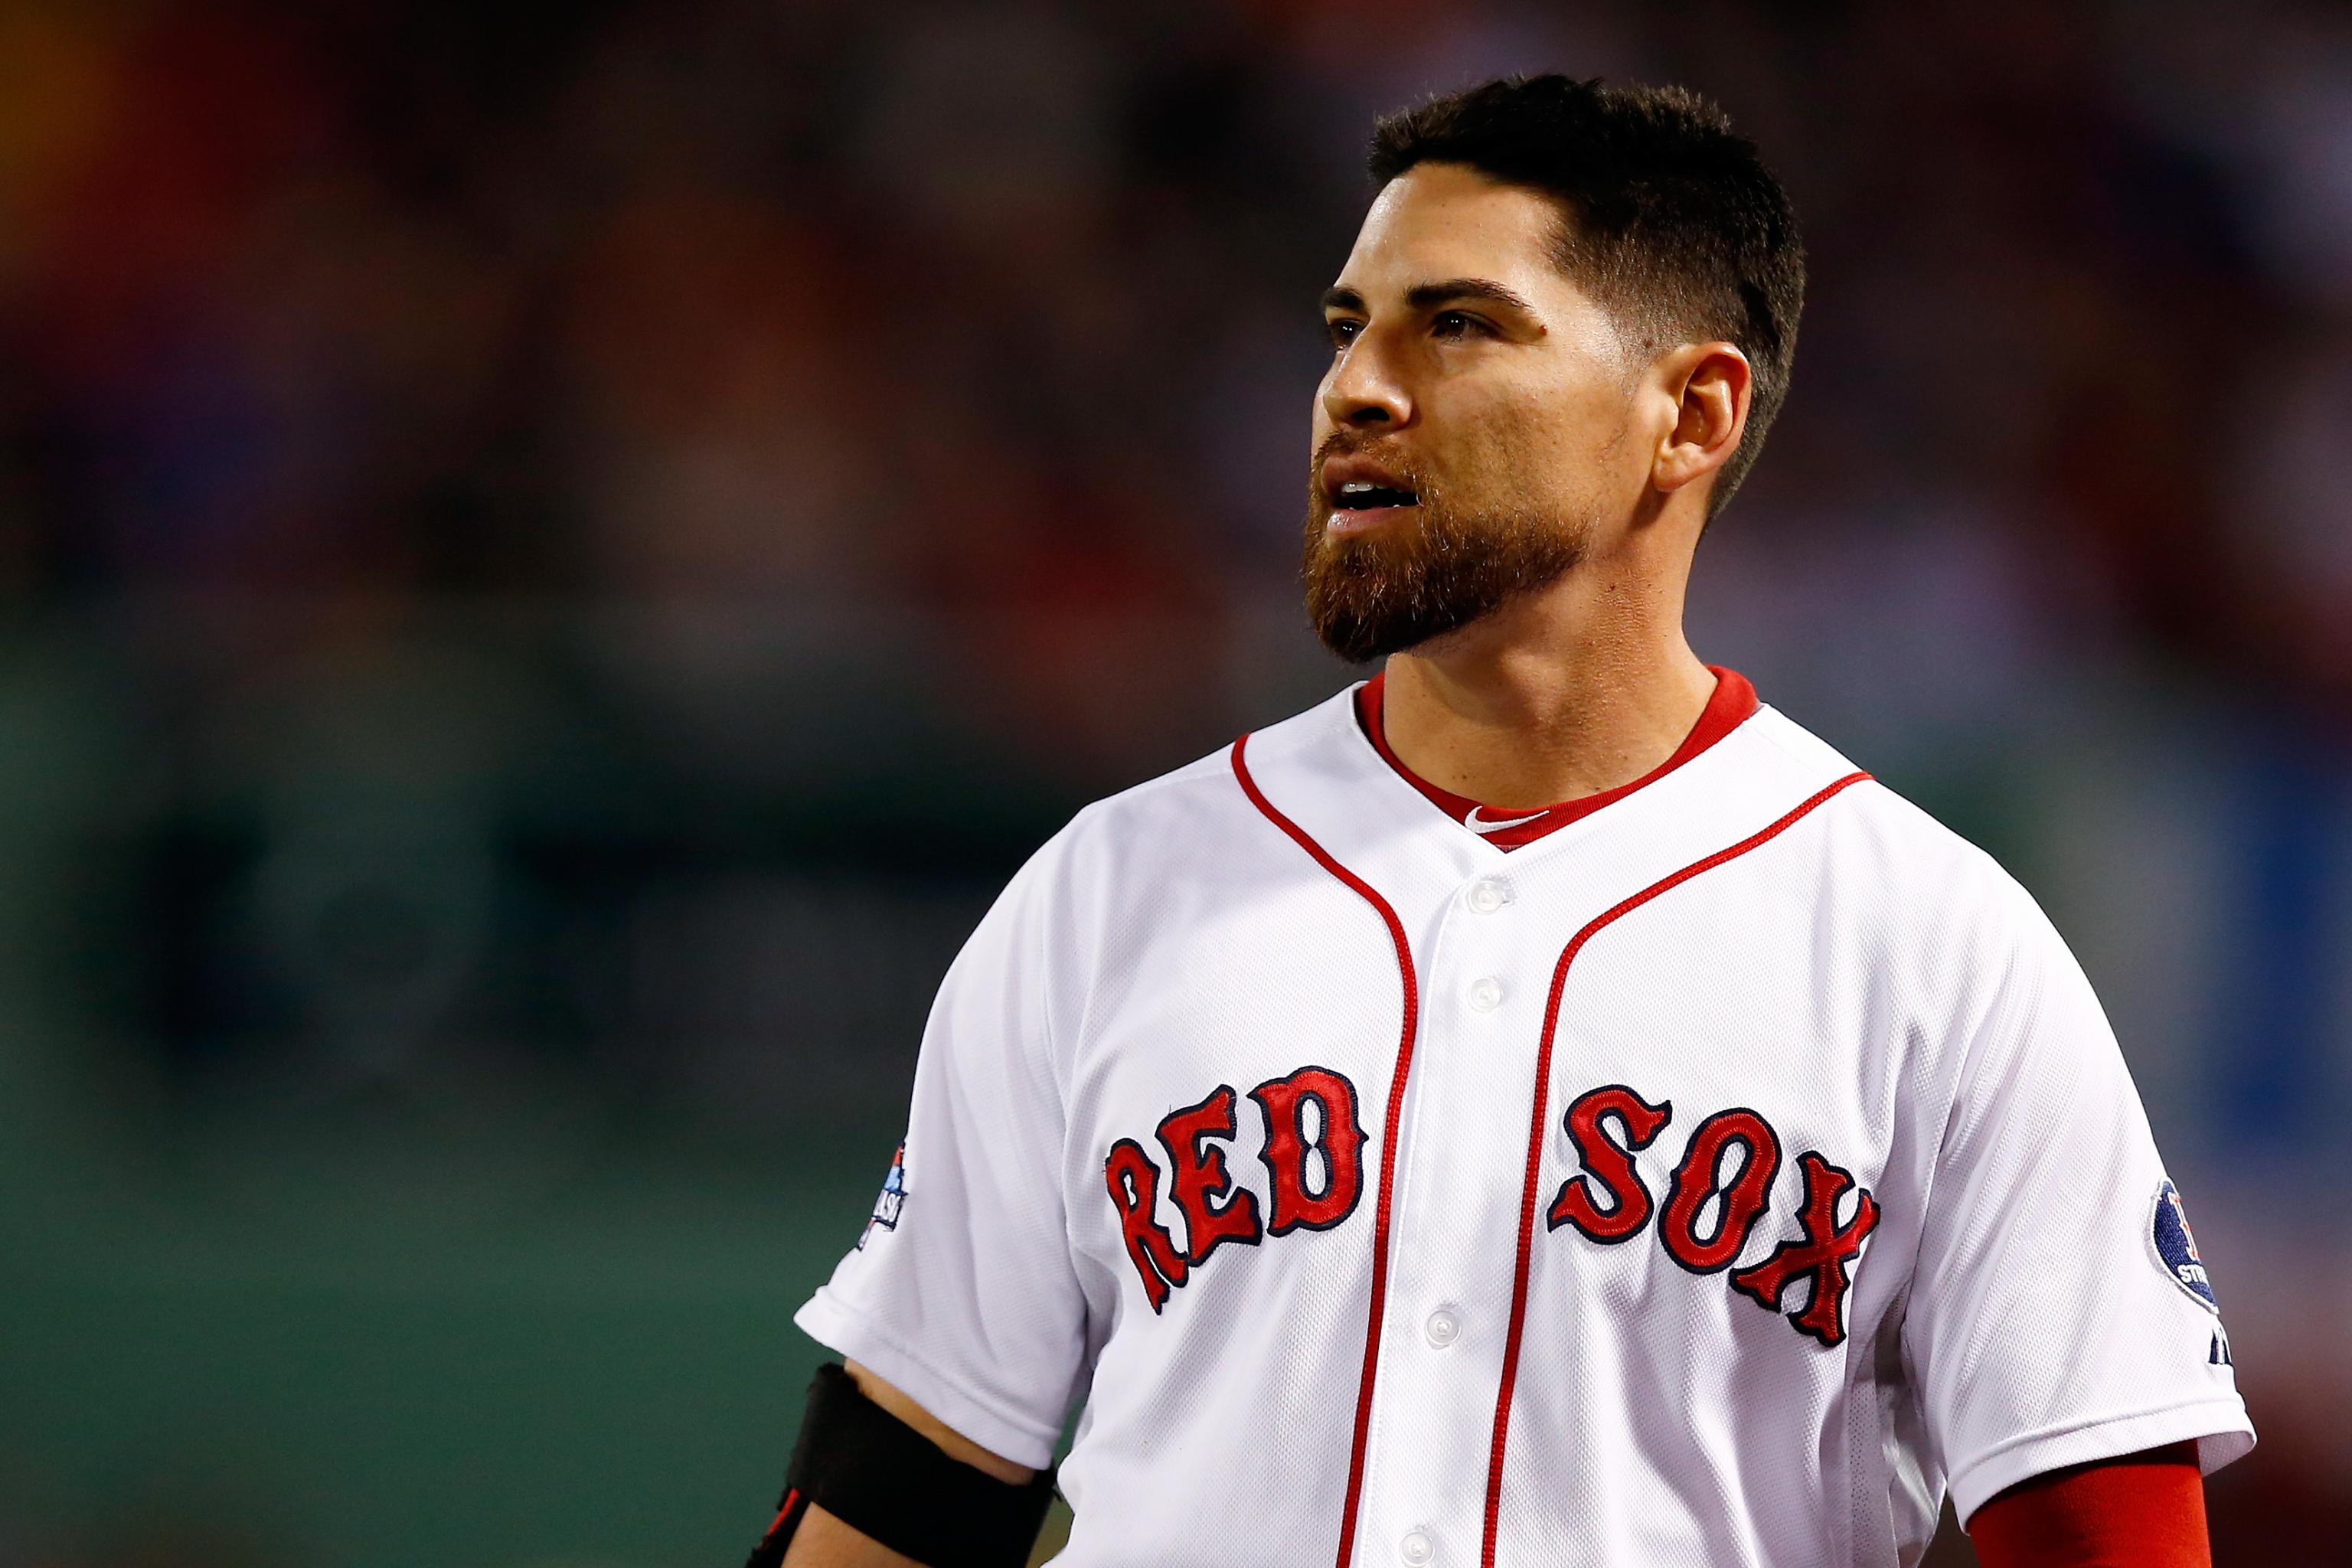 Boston Red Sox Were Smart Not to Re-Sign Jacoby Ellsbury